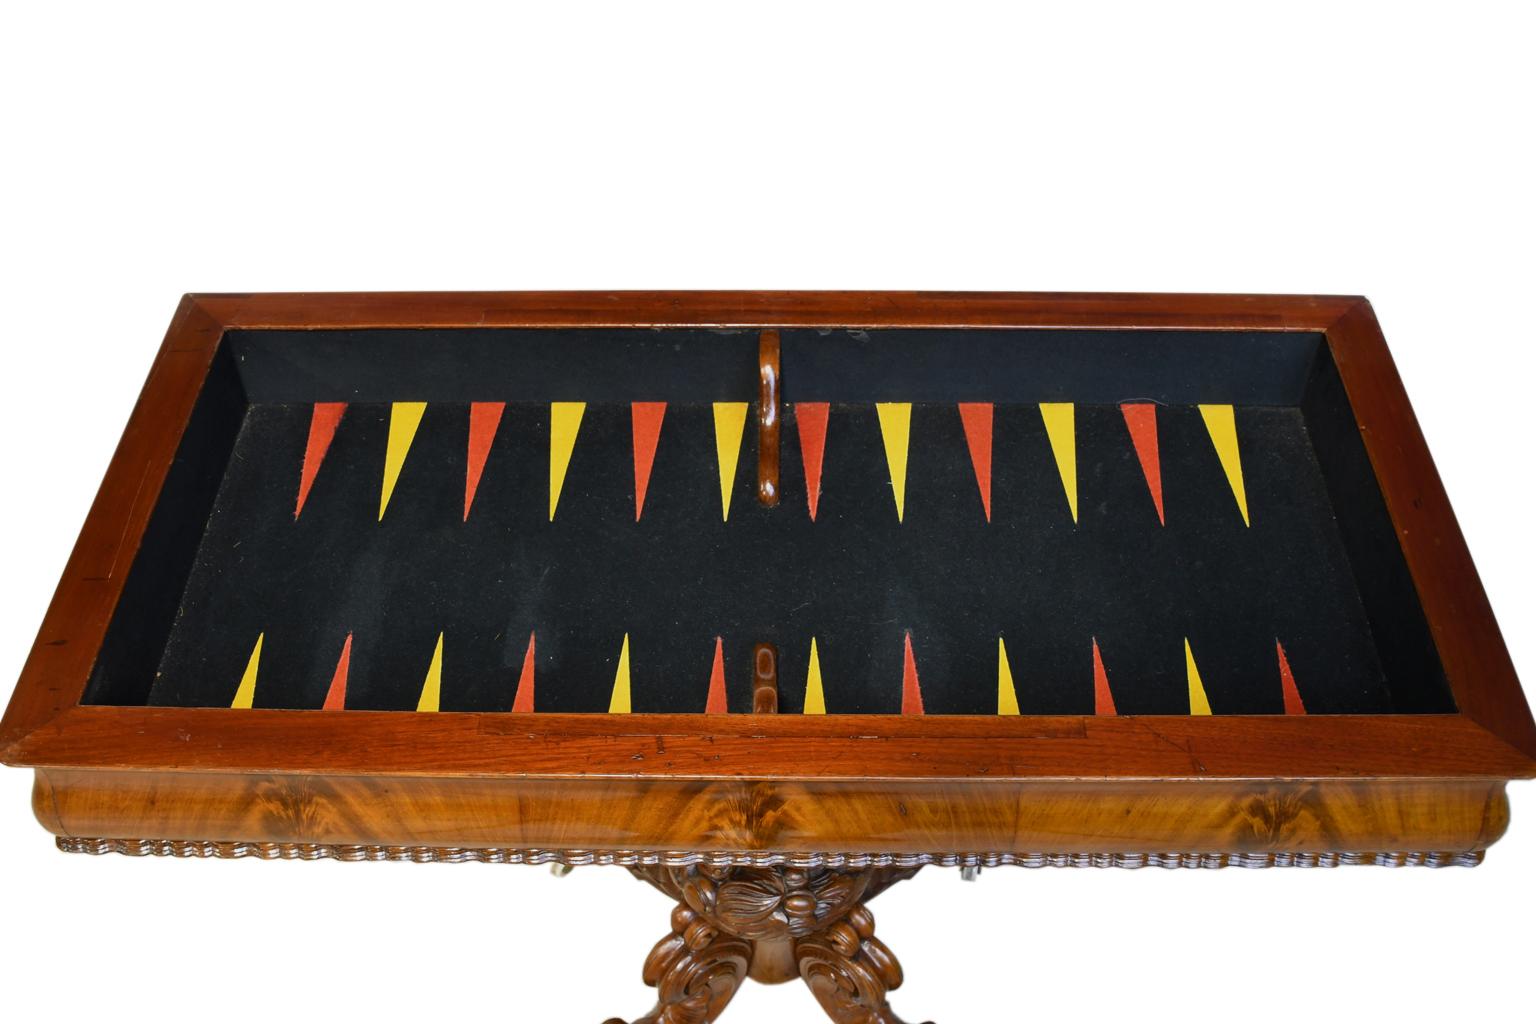 Rococo-revival game table in Cuban mahogany with beautifully-articulated pedestal base, backgammon felt-lined inner playing surface and two round surfaces that pullout / pull-out for drinks. Top lifts & opens to a square on a fully-finished base